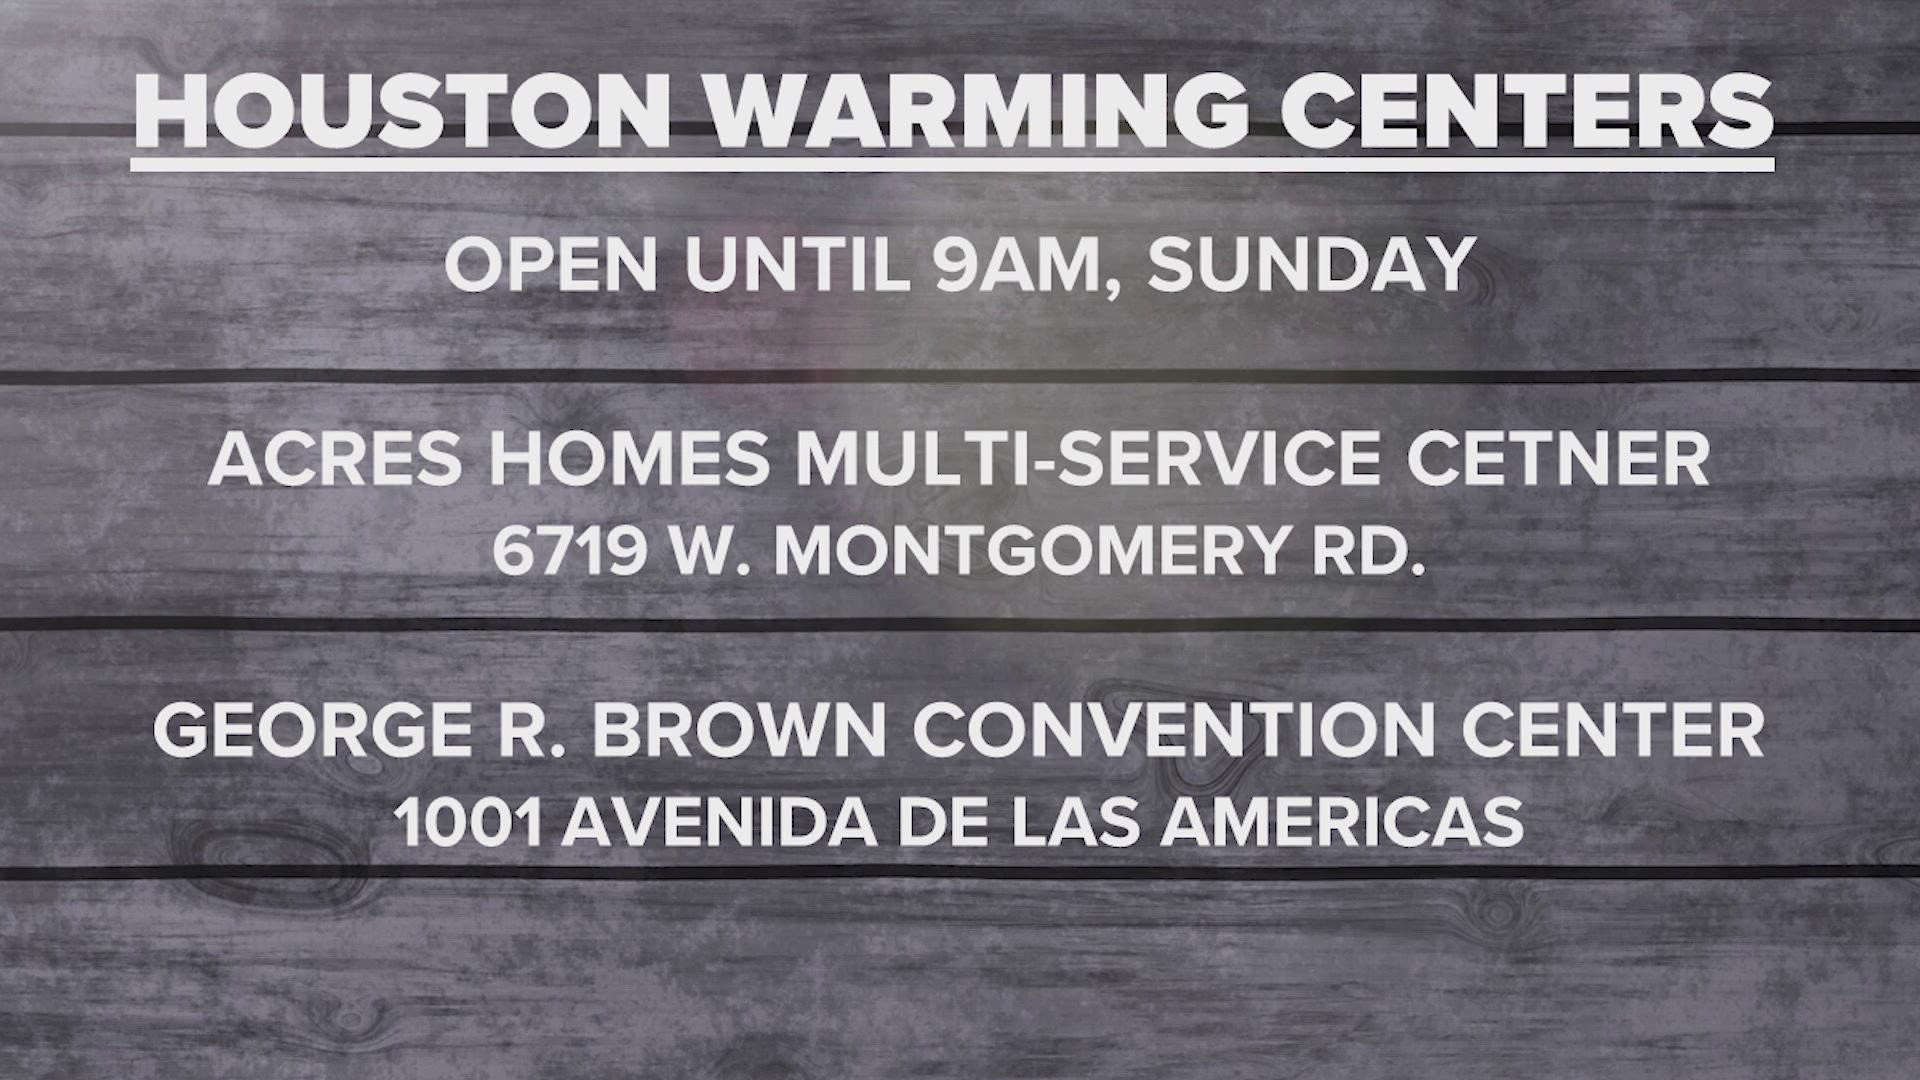 On Sunday, METRO will be available to drop people off at a location of their choice.